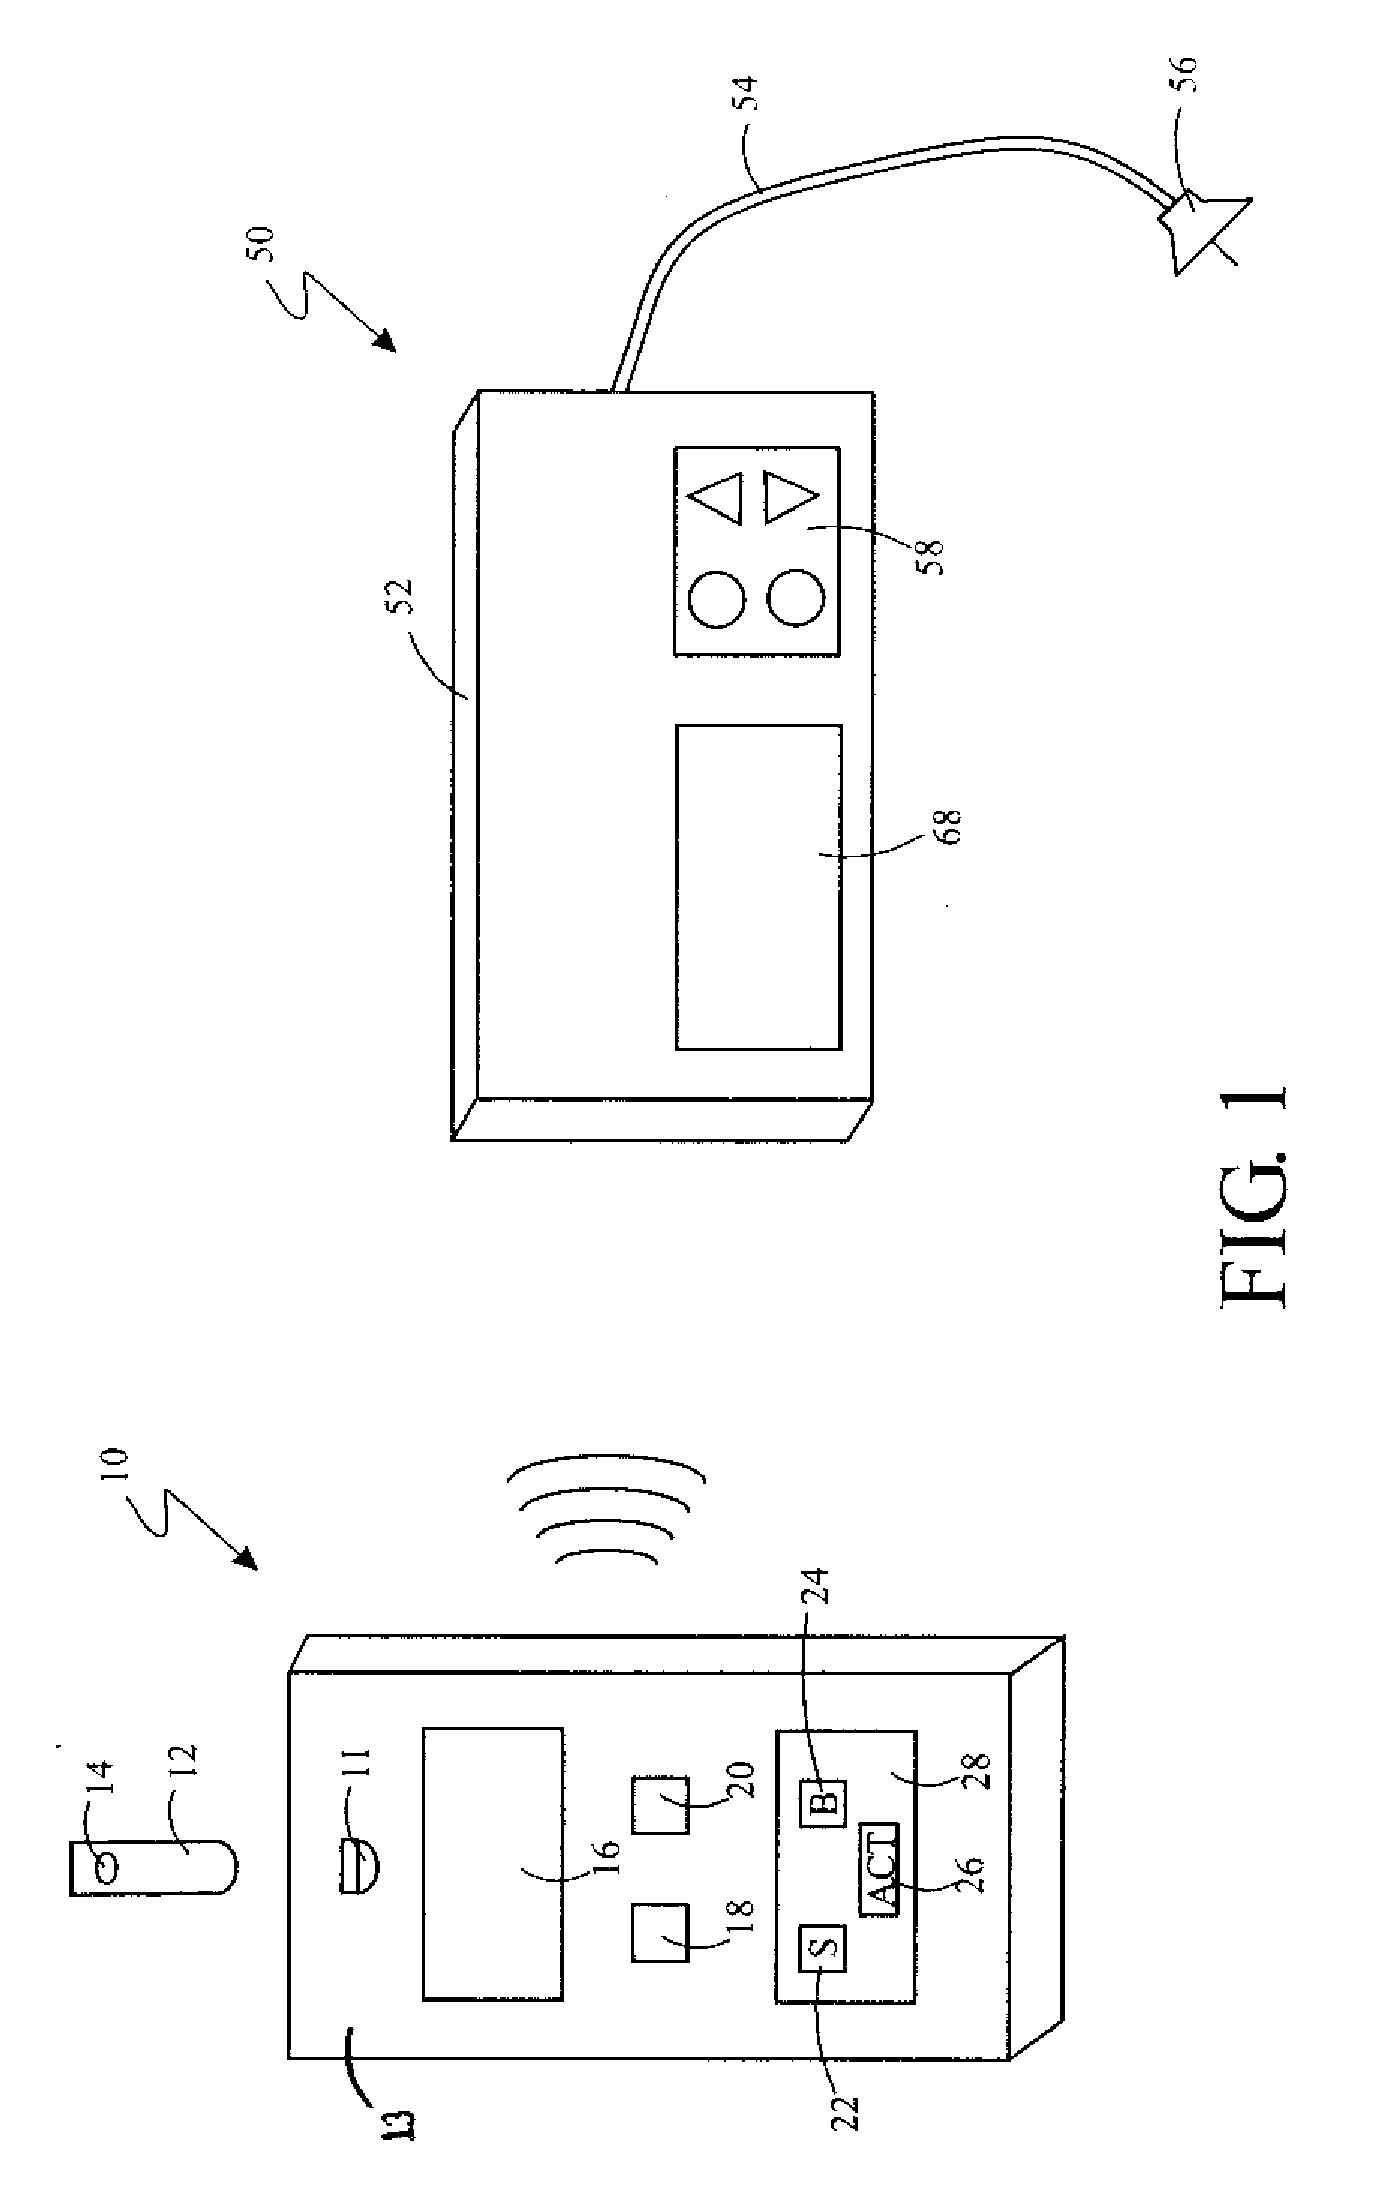 System for Providing Blood Glucose Measurements to an Infusion Device